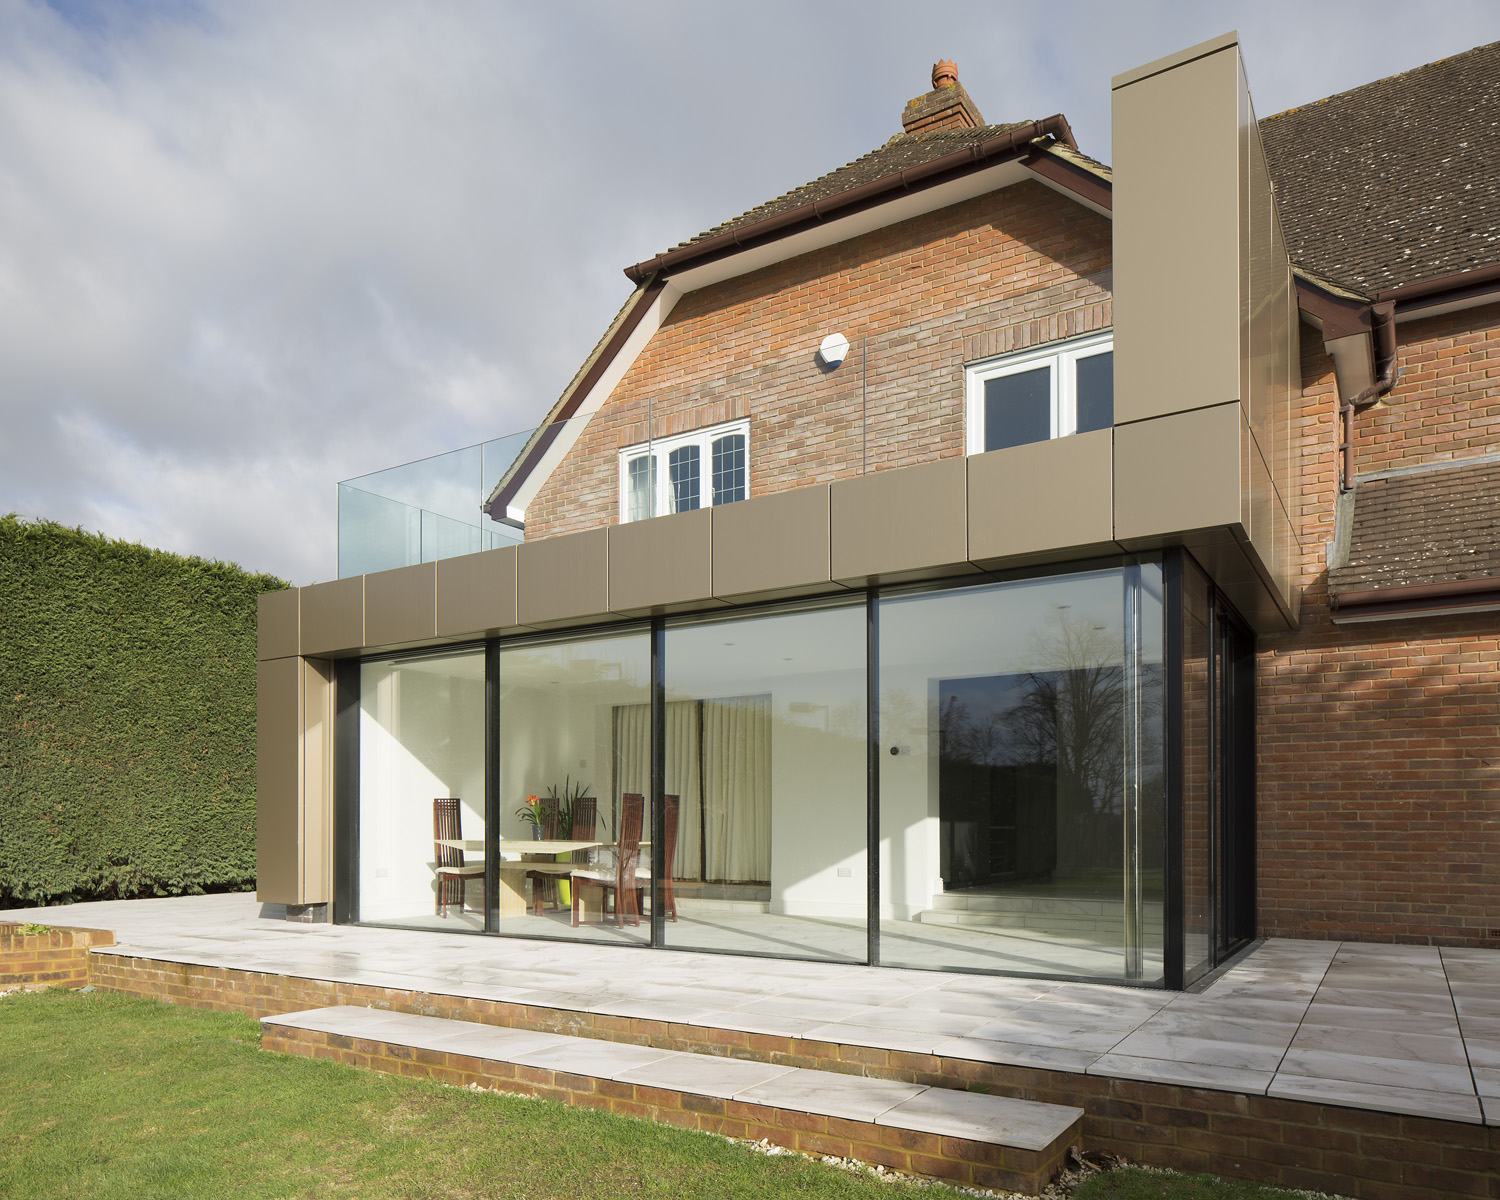 </p> <p>Find your ideal home design pro on designfor-me.com - get matched and see who's interested in your home project. Click image to see more inspiration from our design pros</p> <p>Design by Ben, architect from Mole Valley, South East</p> <p>#architecture #homedesign #modernhomes #homeinspiration #extensions #extensiondesign #extensioninspiration #extensionideas #houseextension #slidingdoors </p> <p>